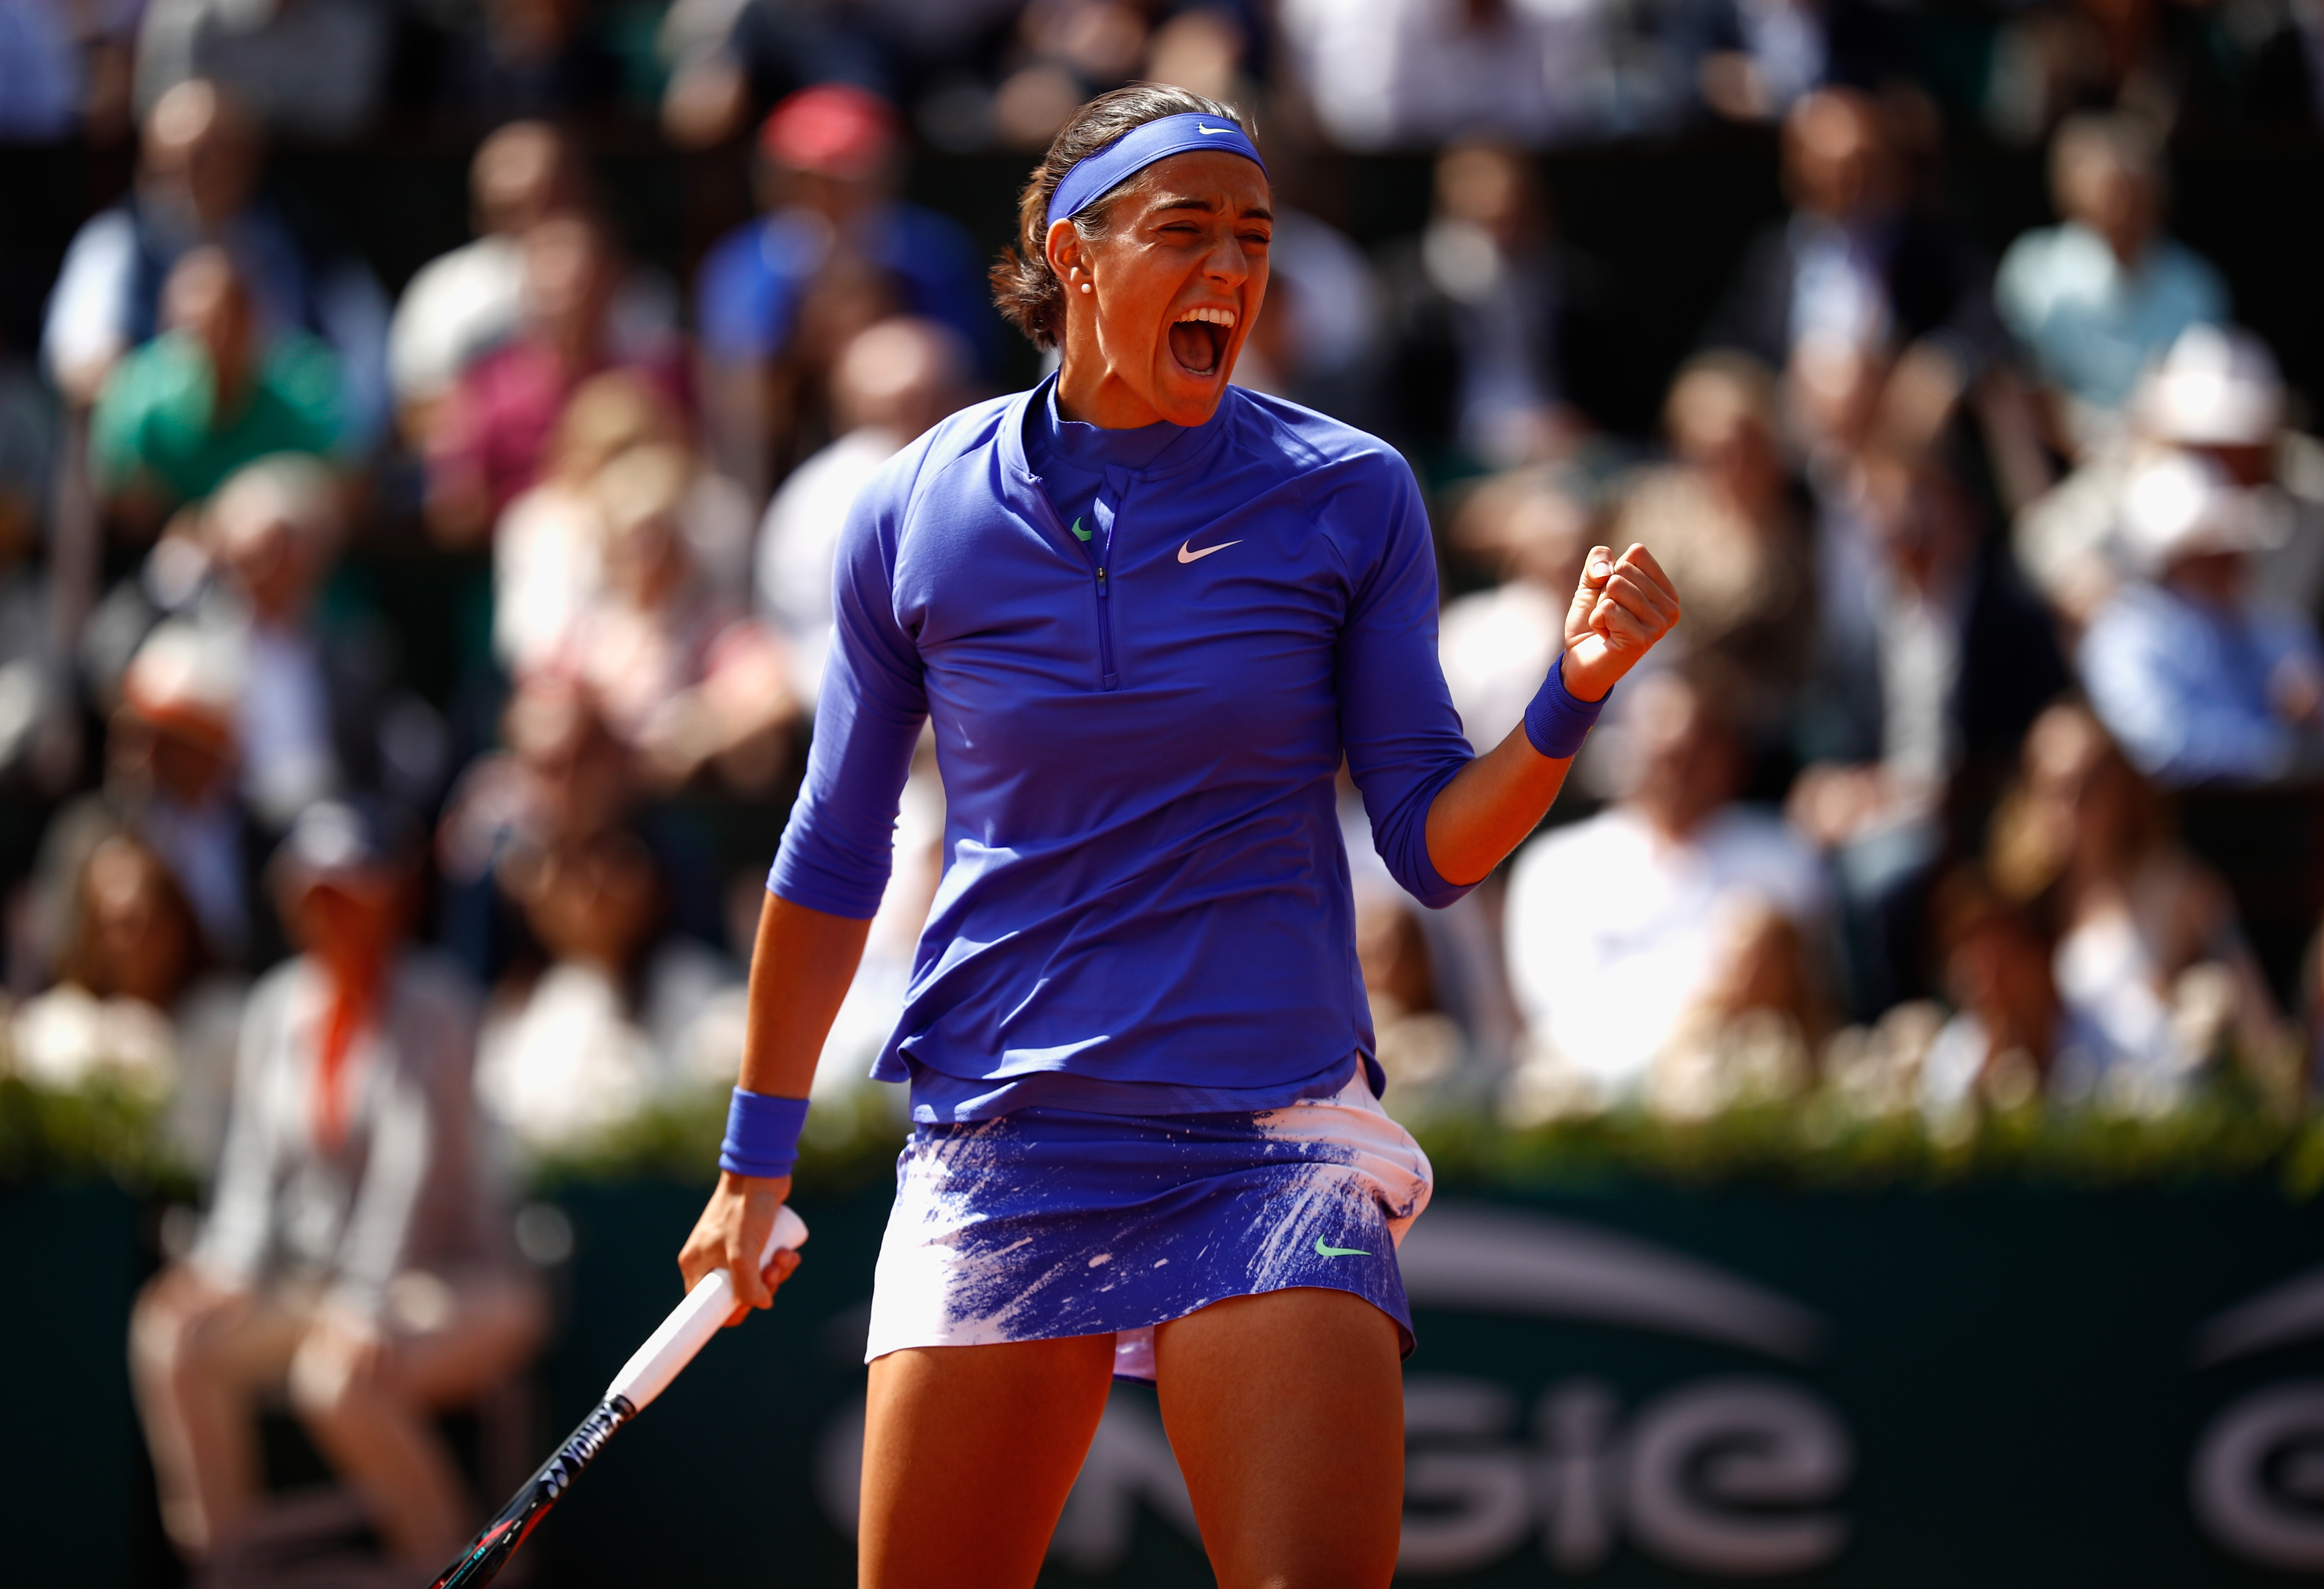 PARIS, FRANCE - JUNE 07: Caroline Garcia of France celebrates during ladies singles quarter finals match against Karolina Pliskova of The Czech Republic on day eleven of the 2017 French Open at Roland Garros on June 7, 2017 in Paris, France. (Photo by Adam Pretty/Getty Images)